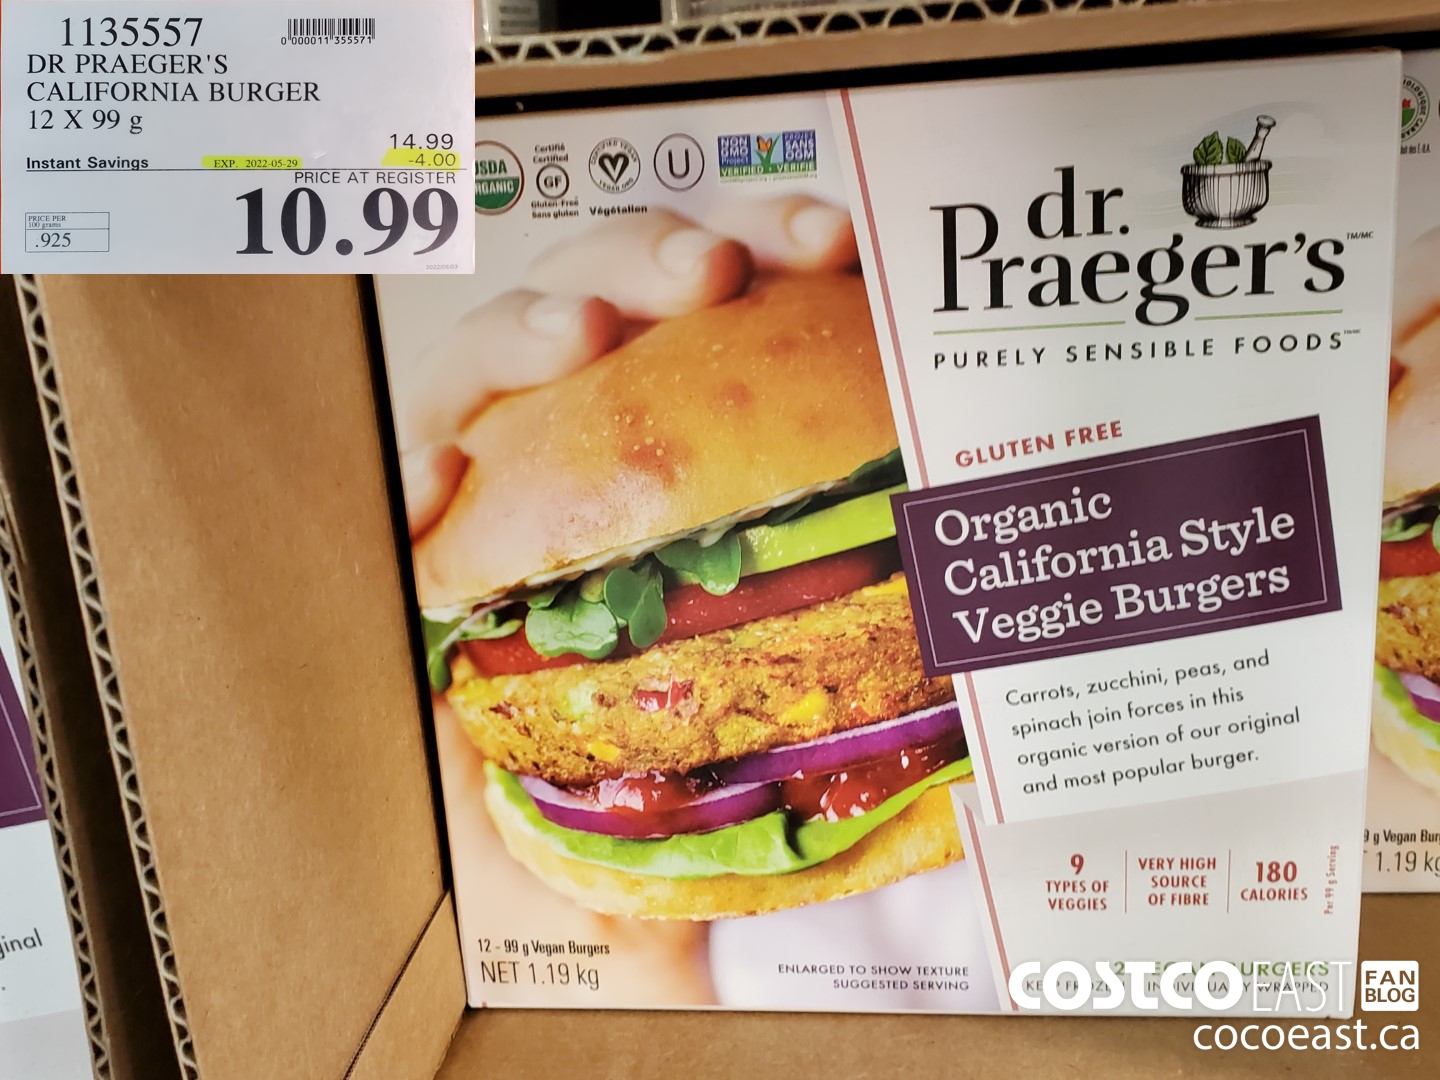 Costco East 2022 Spring Superpost: The Entire Costco Frozen Food Section! -  Costco East Fan Blog